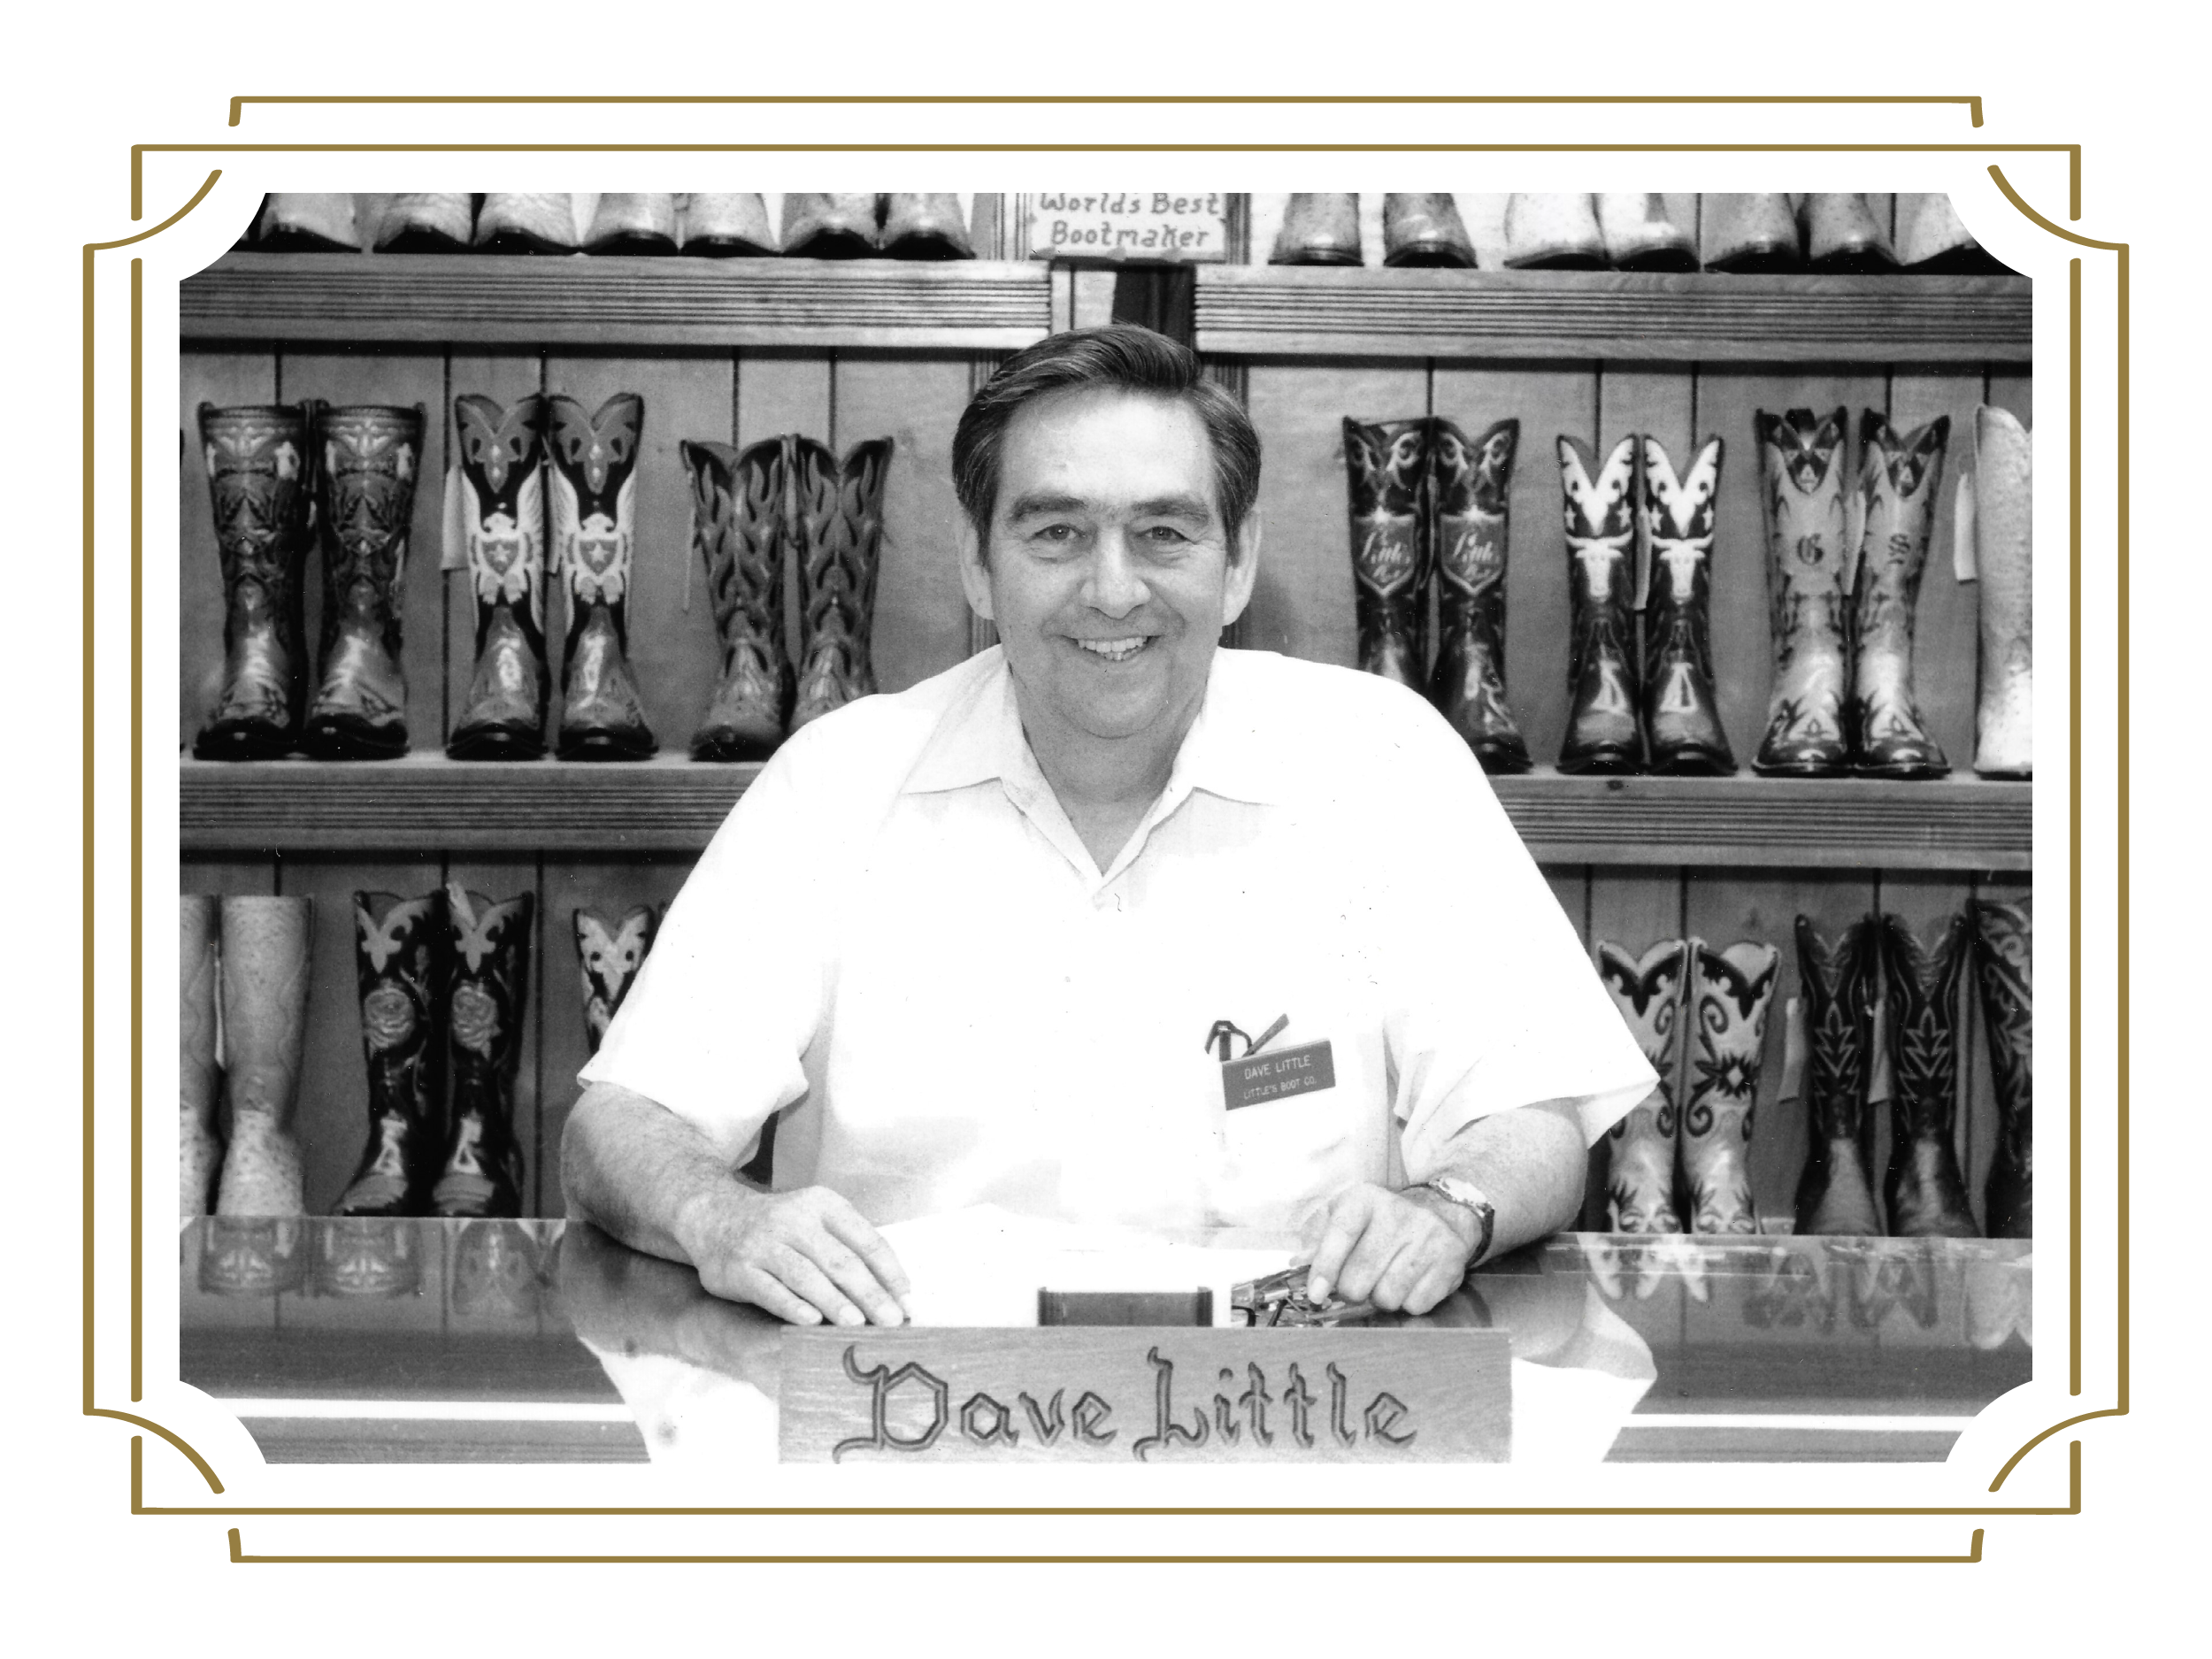 A man in a white shirt stands behind a counter with a nametag "Dave Little" in front of a display of personalized luxury cowboy boots.